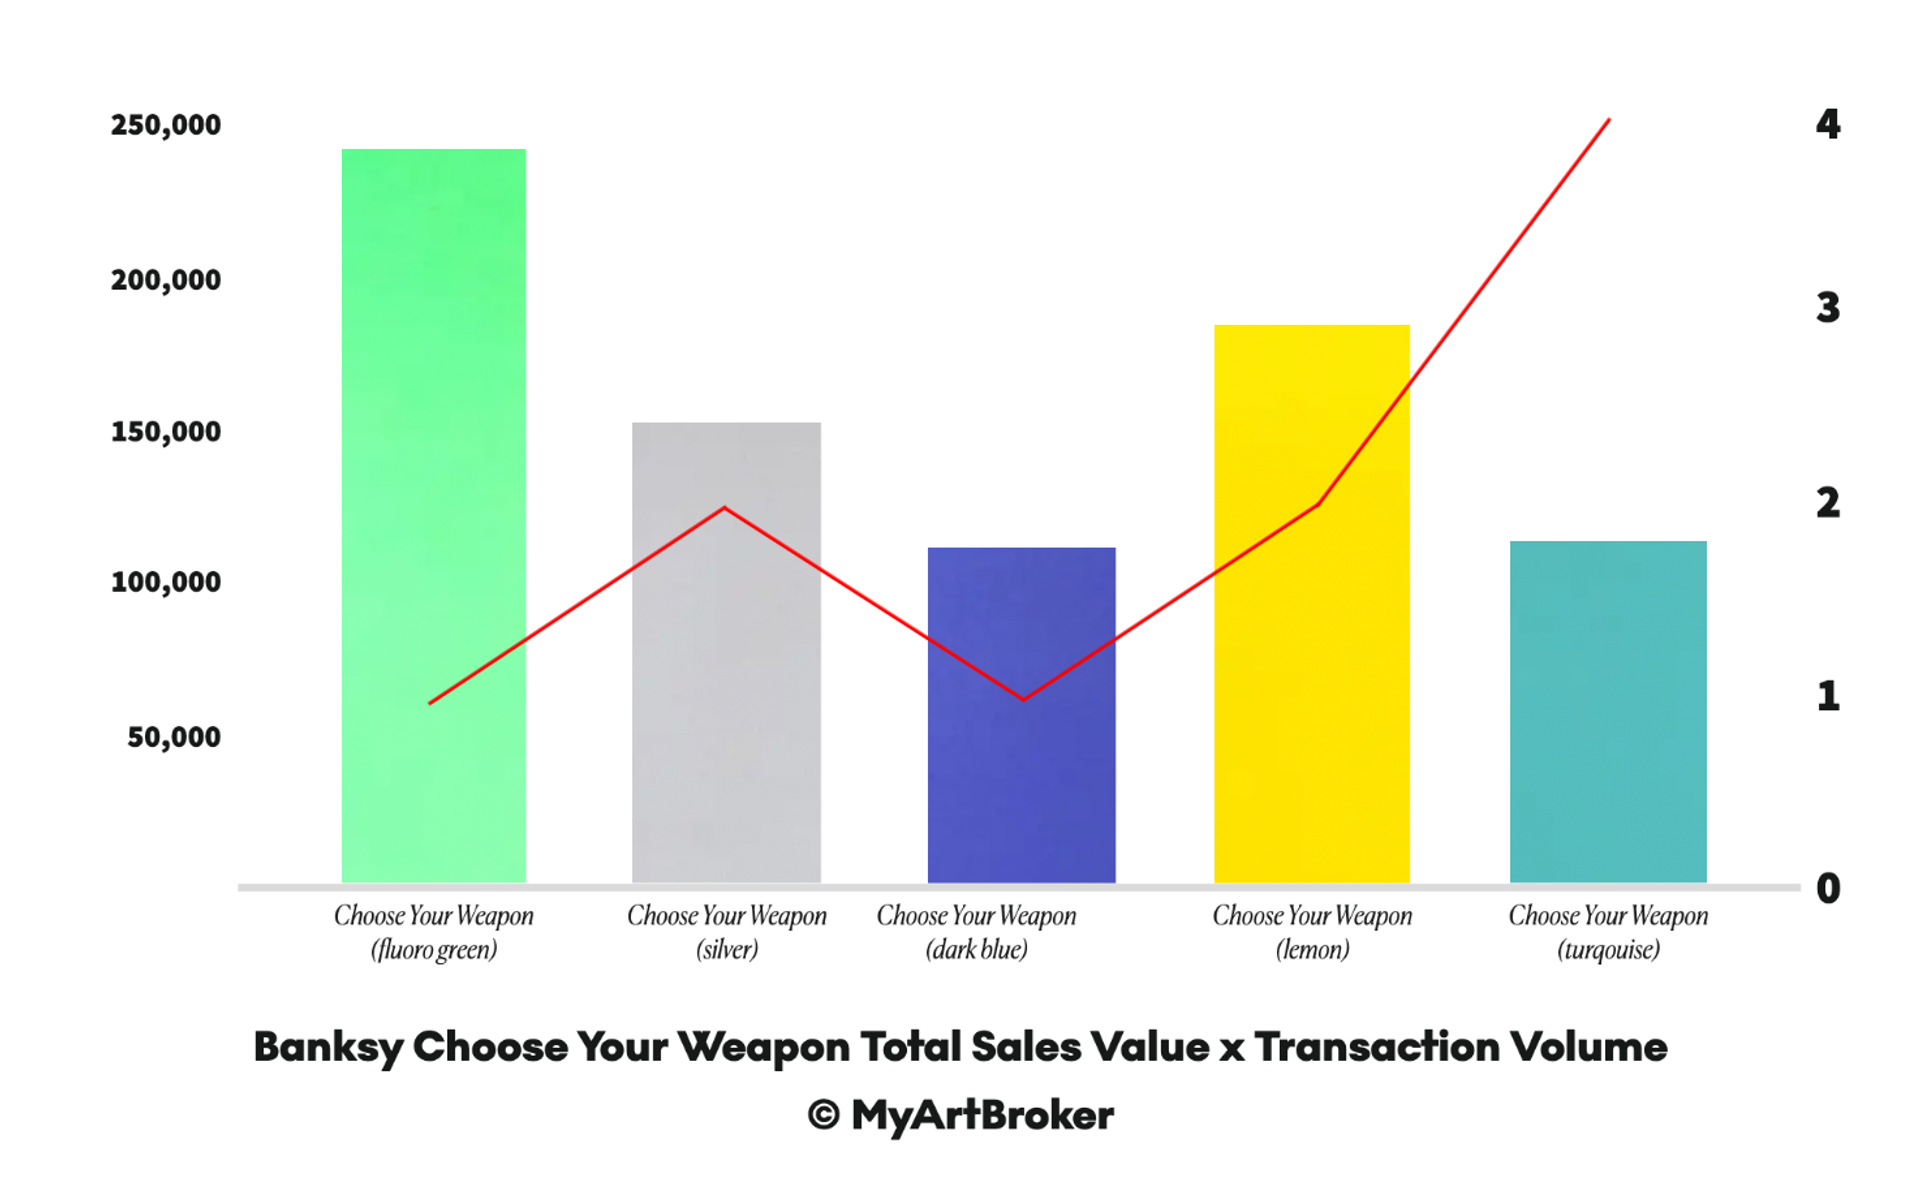 A bar chart illustrating the total sales value and transaction volume of Banksy's Choose Your Weapon collection in specific colours, showcasing the market performance.